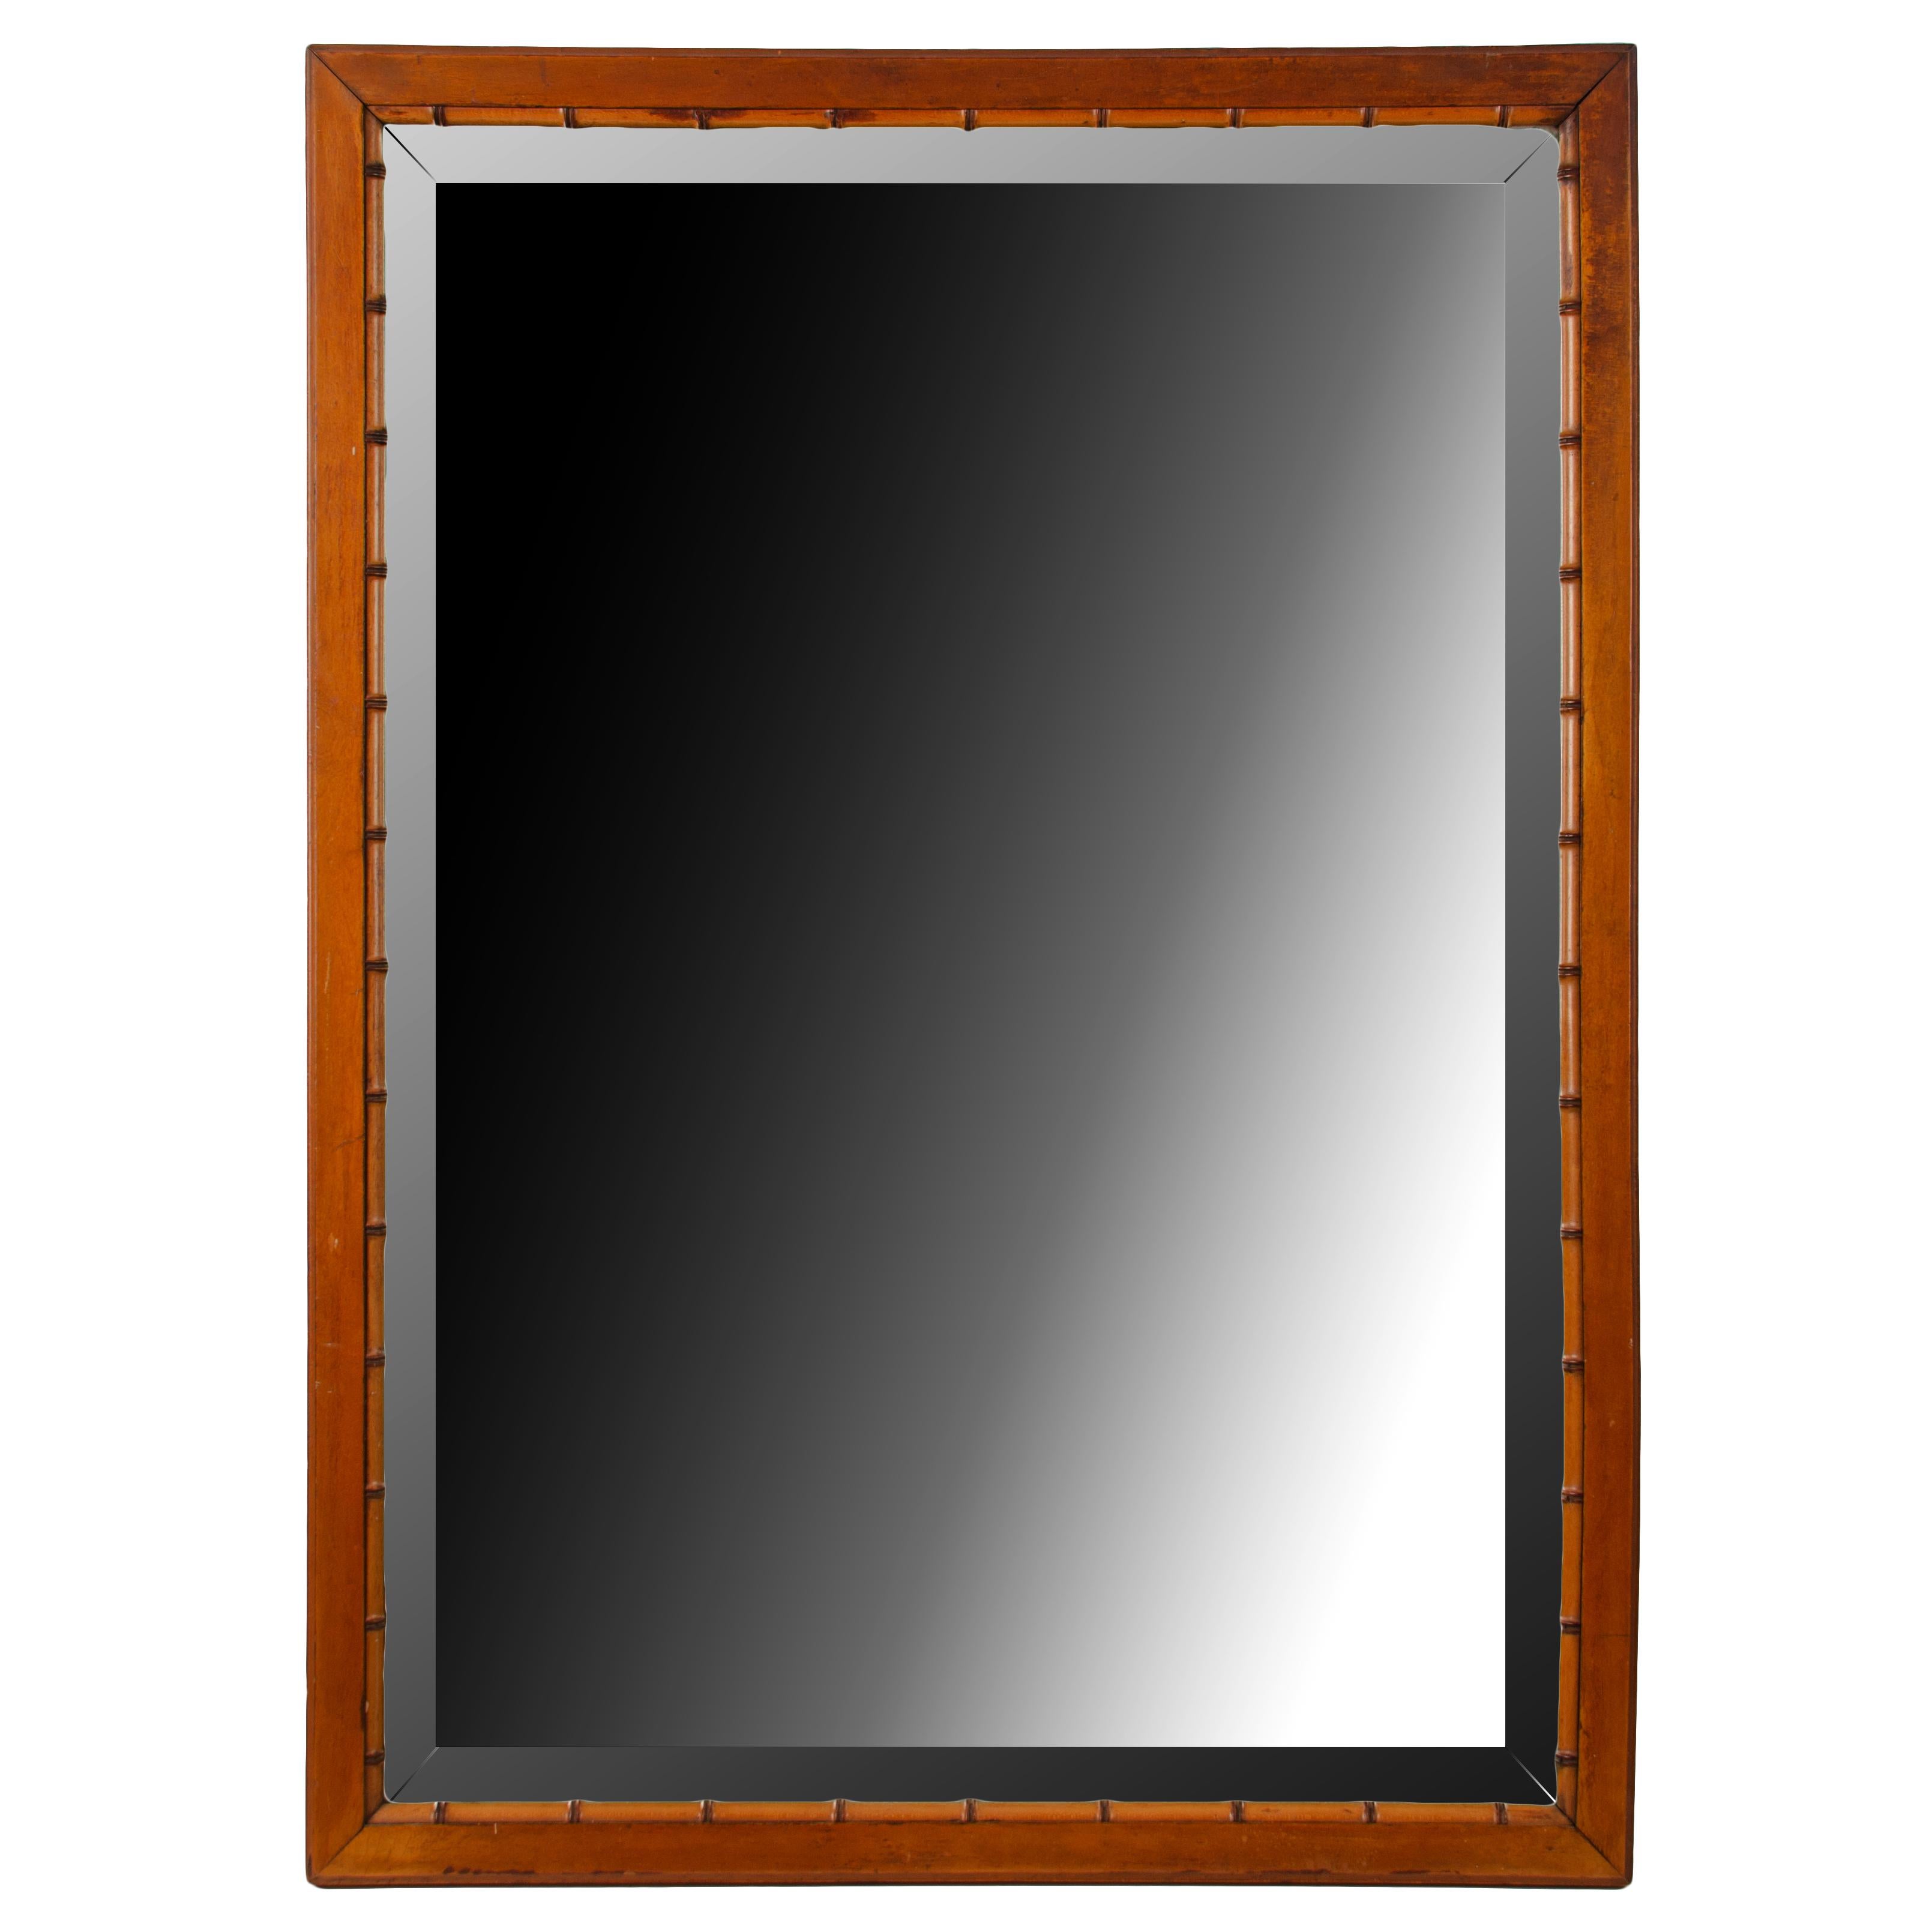 American faux bamboo beechwood beveled mirror, c. 1880 by R.J. Horner & Co.

31 by 43 inches